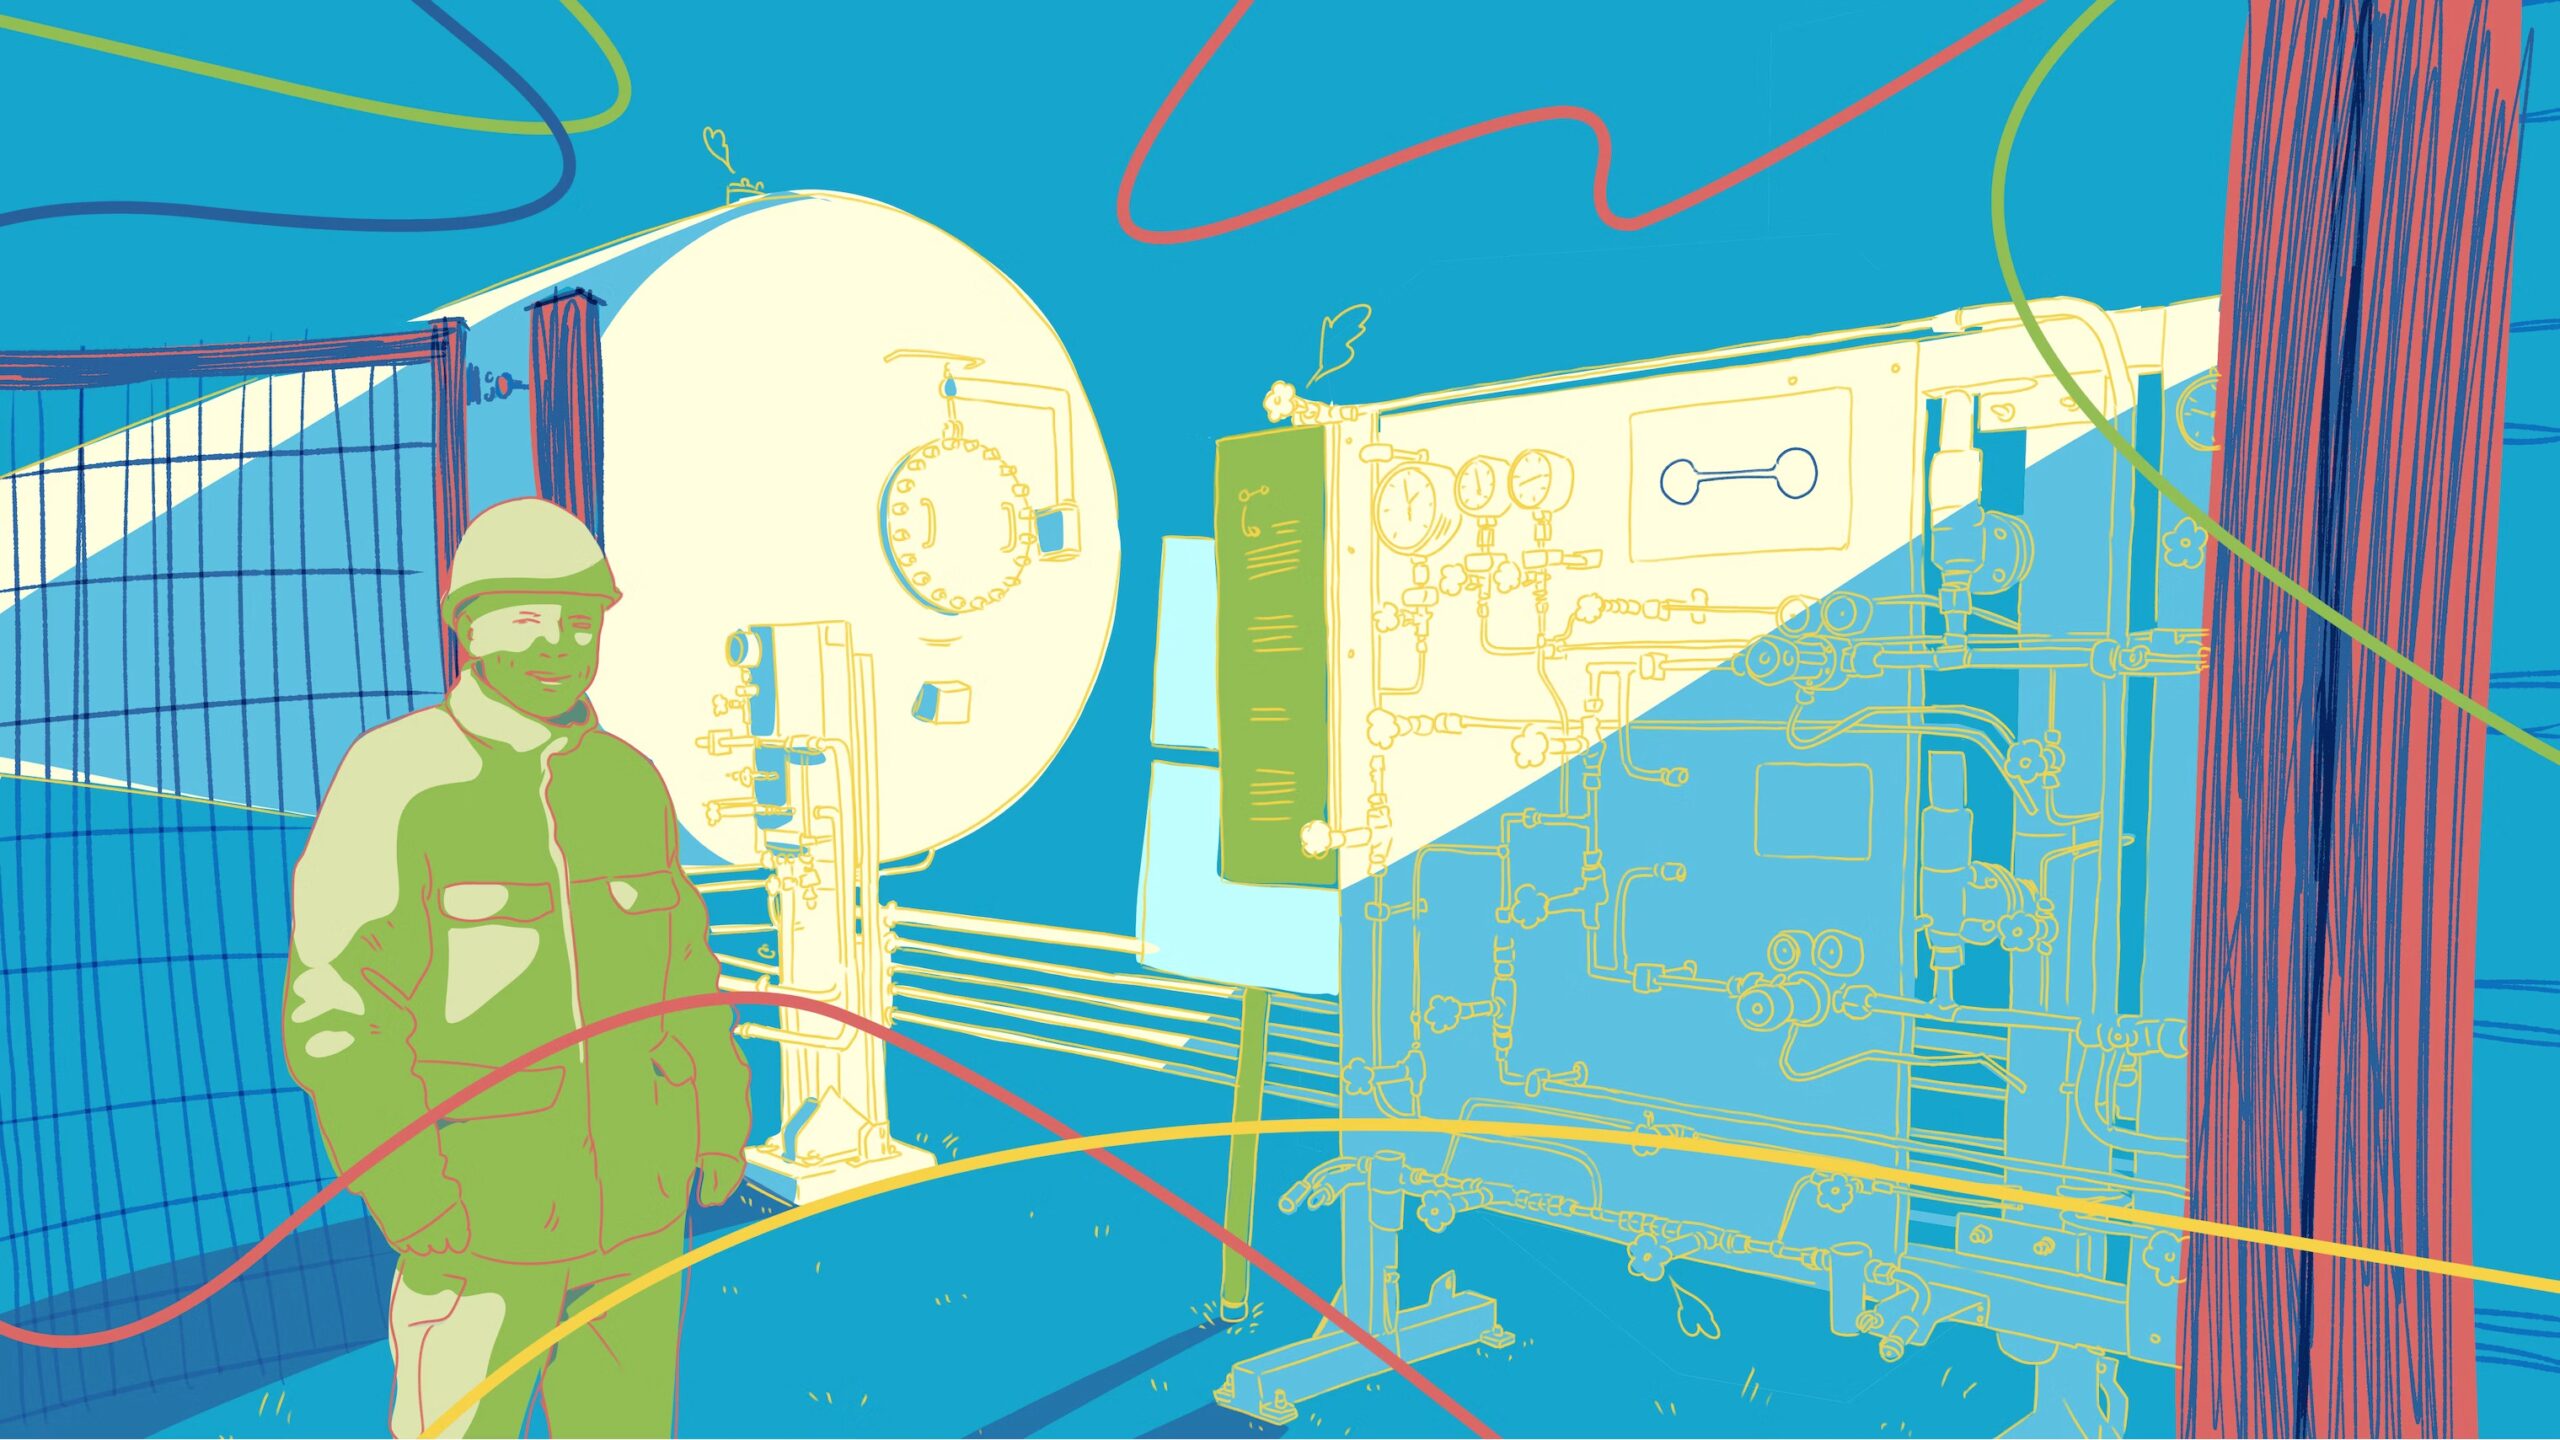 A green-tinted man stands in an industrial factory filled with gadgets and dials